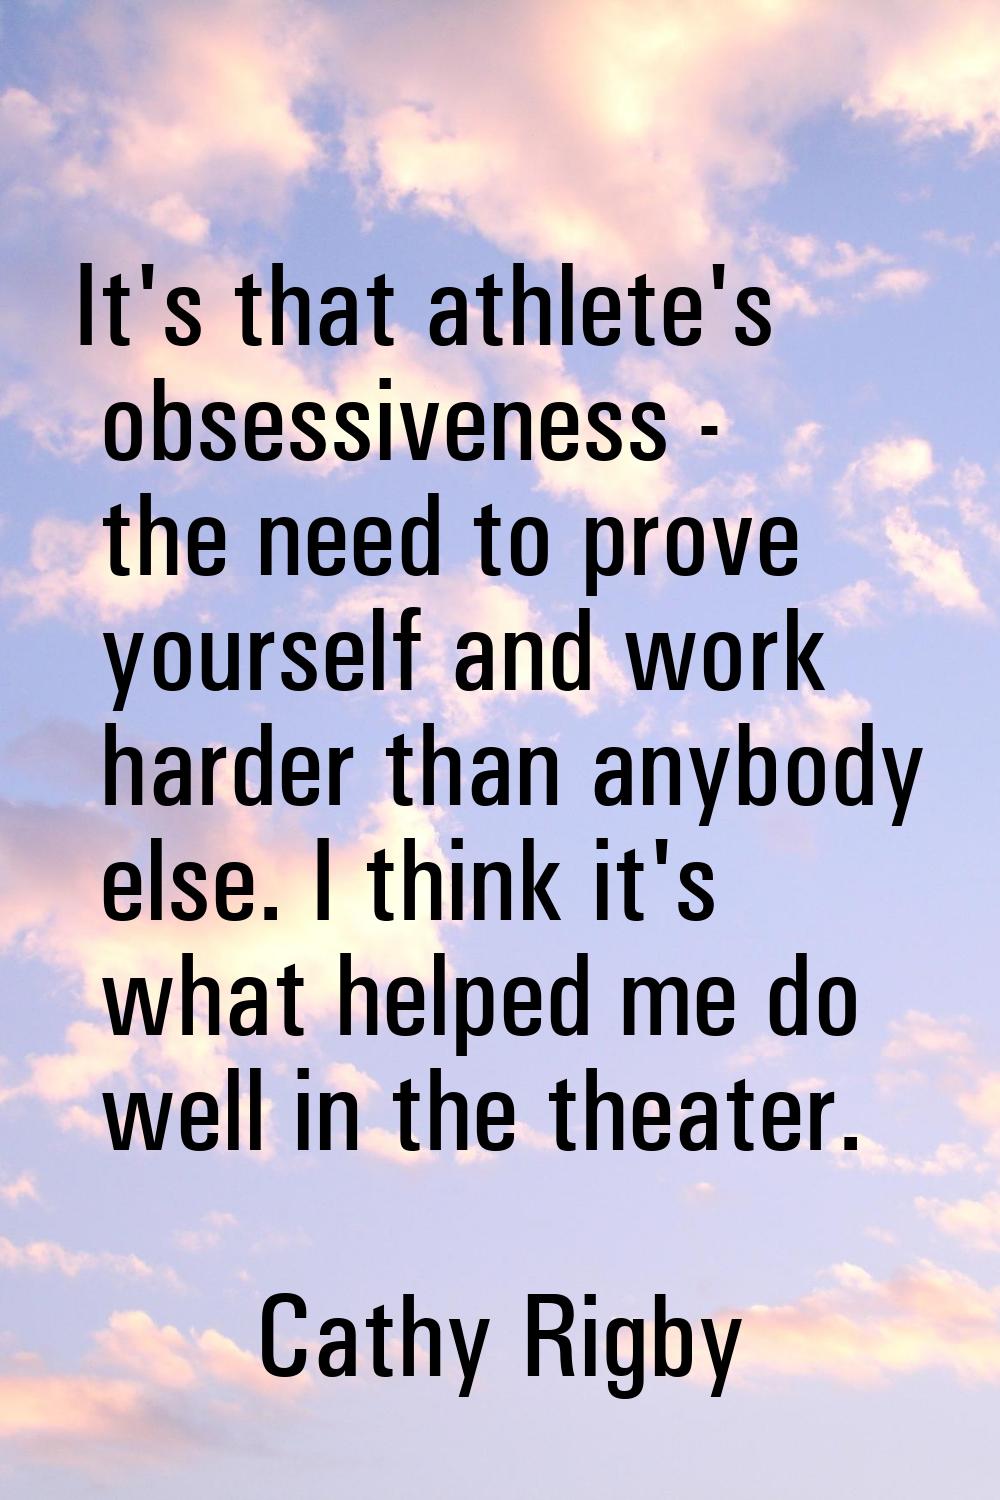 It's that athlete's obsessiveness - the need to prove yourself and work harder than anybody else. I